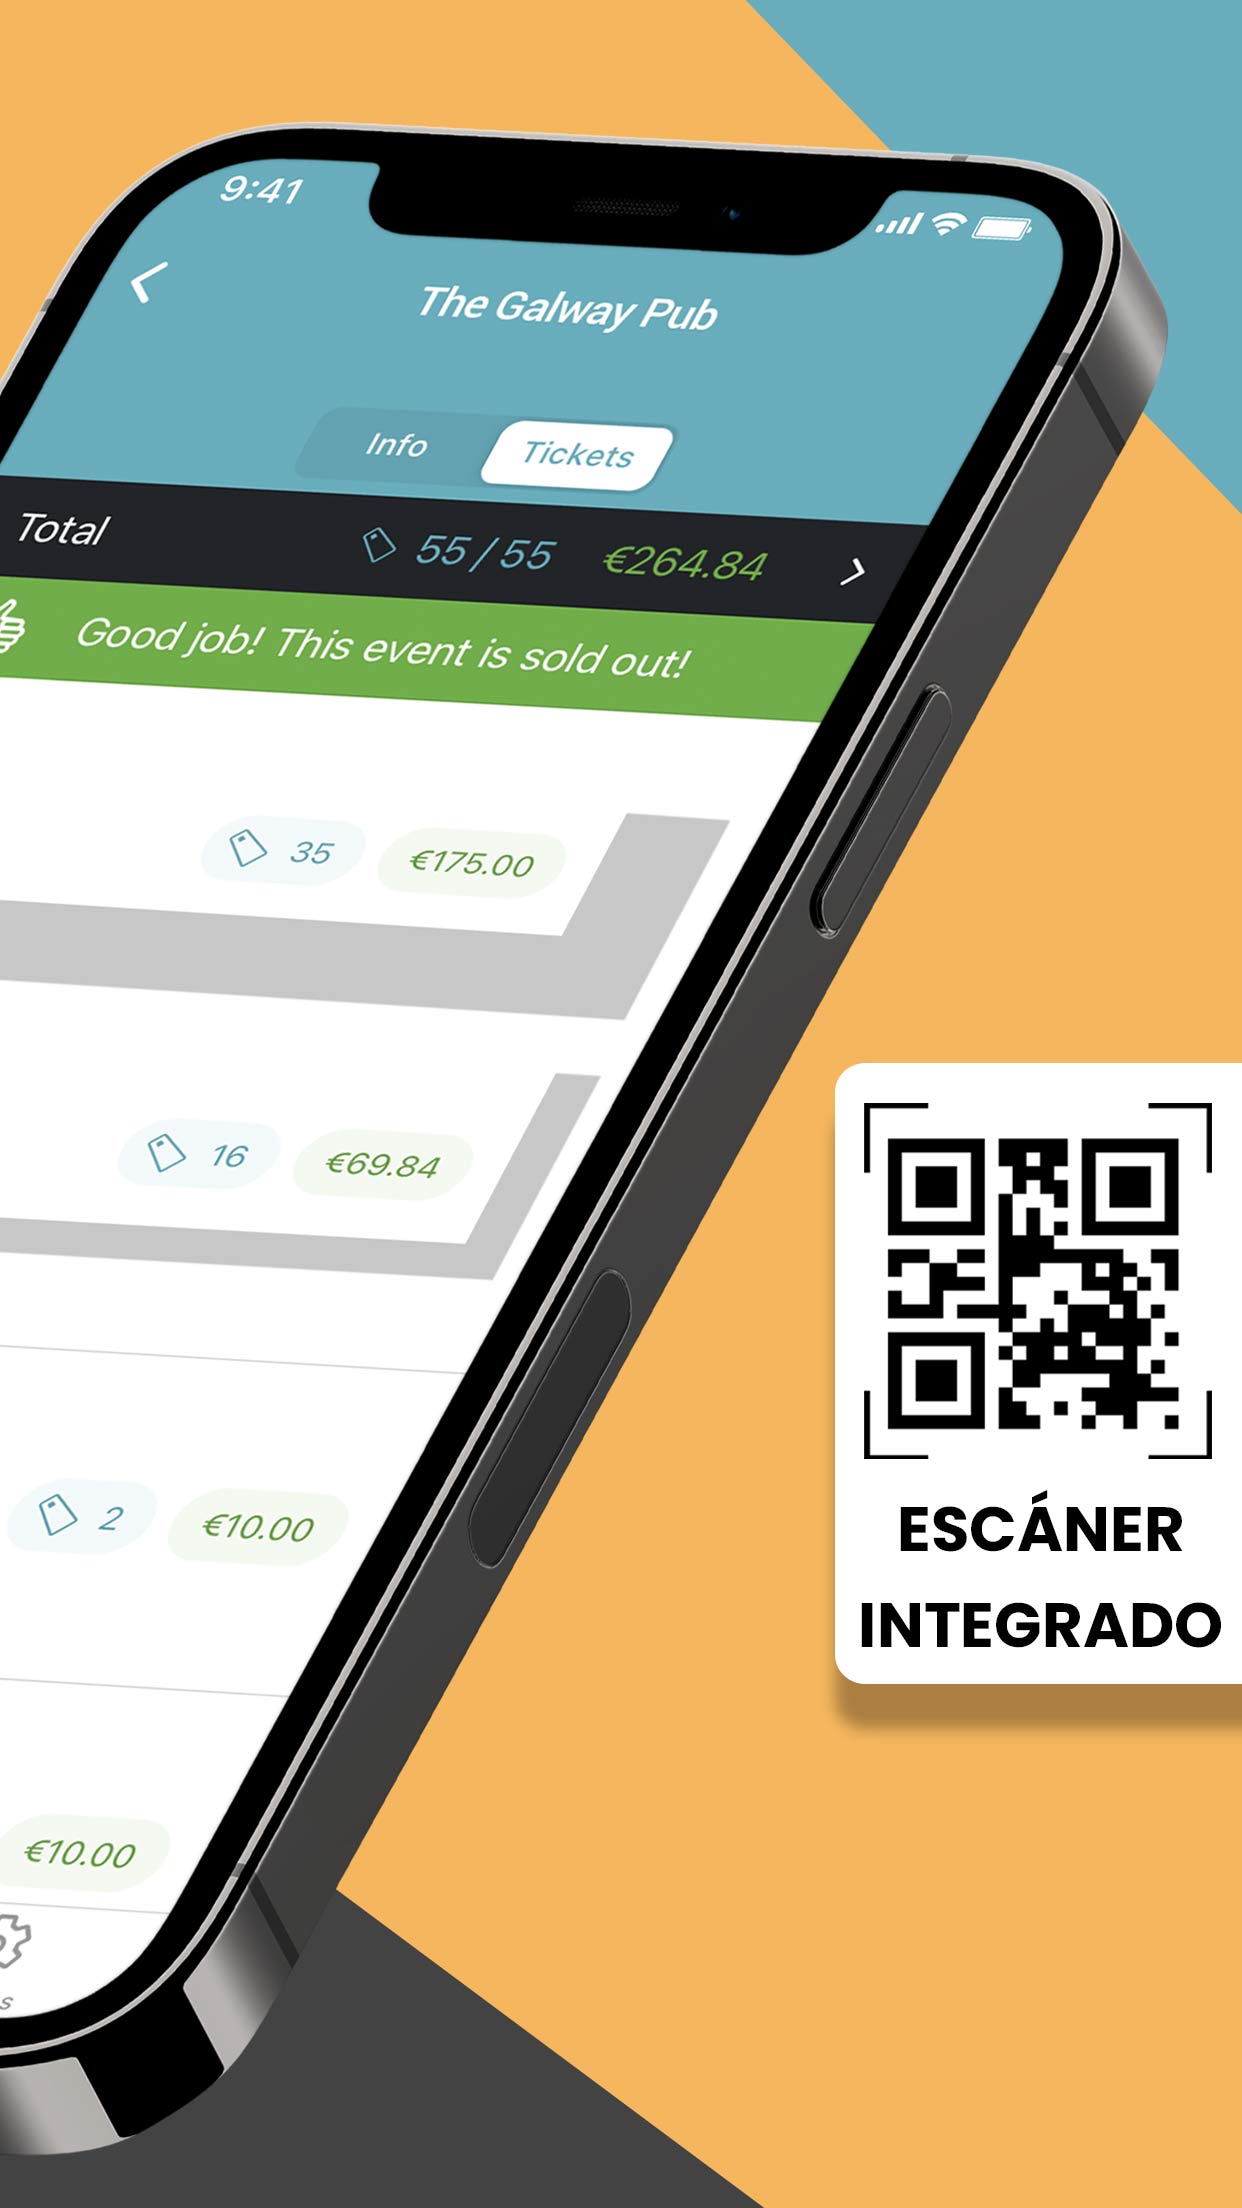 Validate your event tickets with our integrated QR scanner